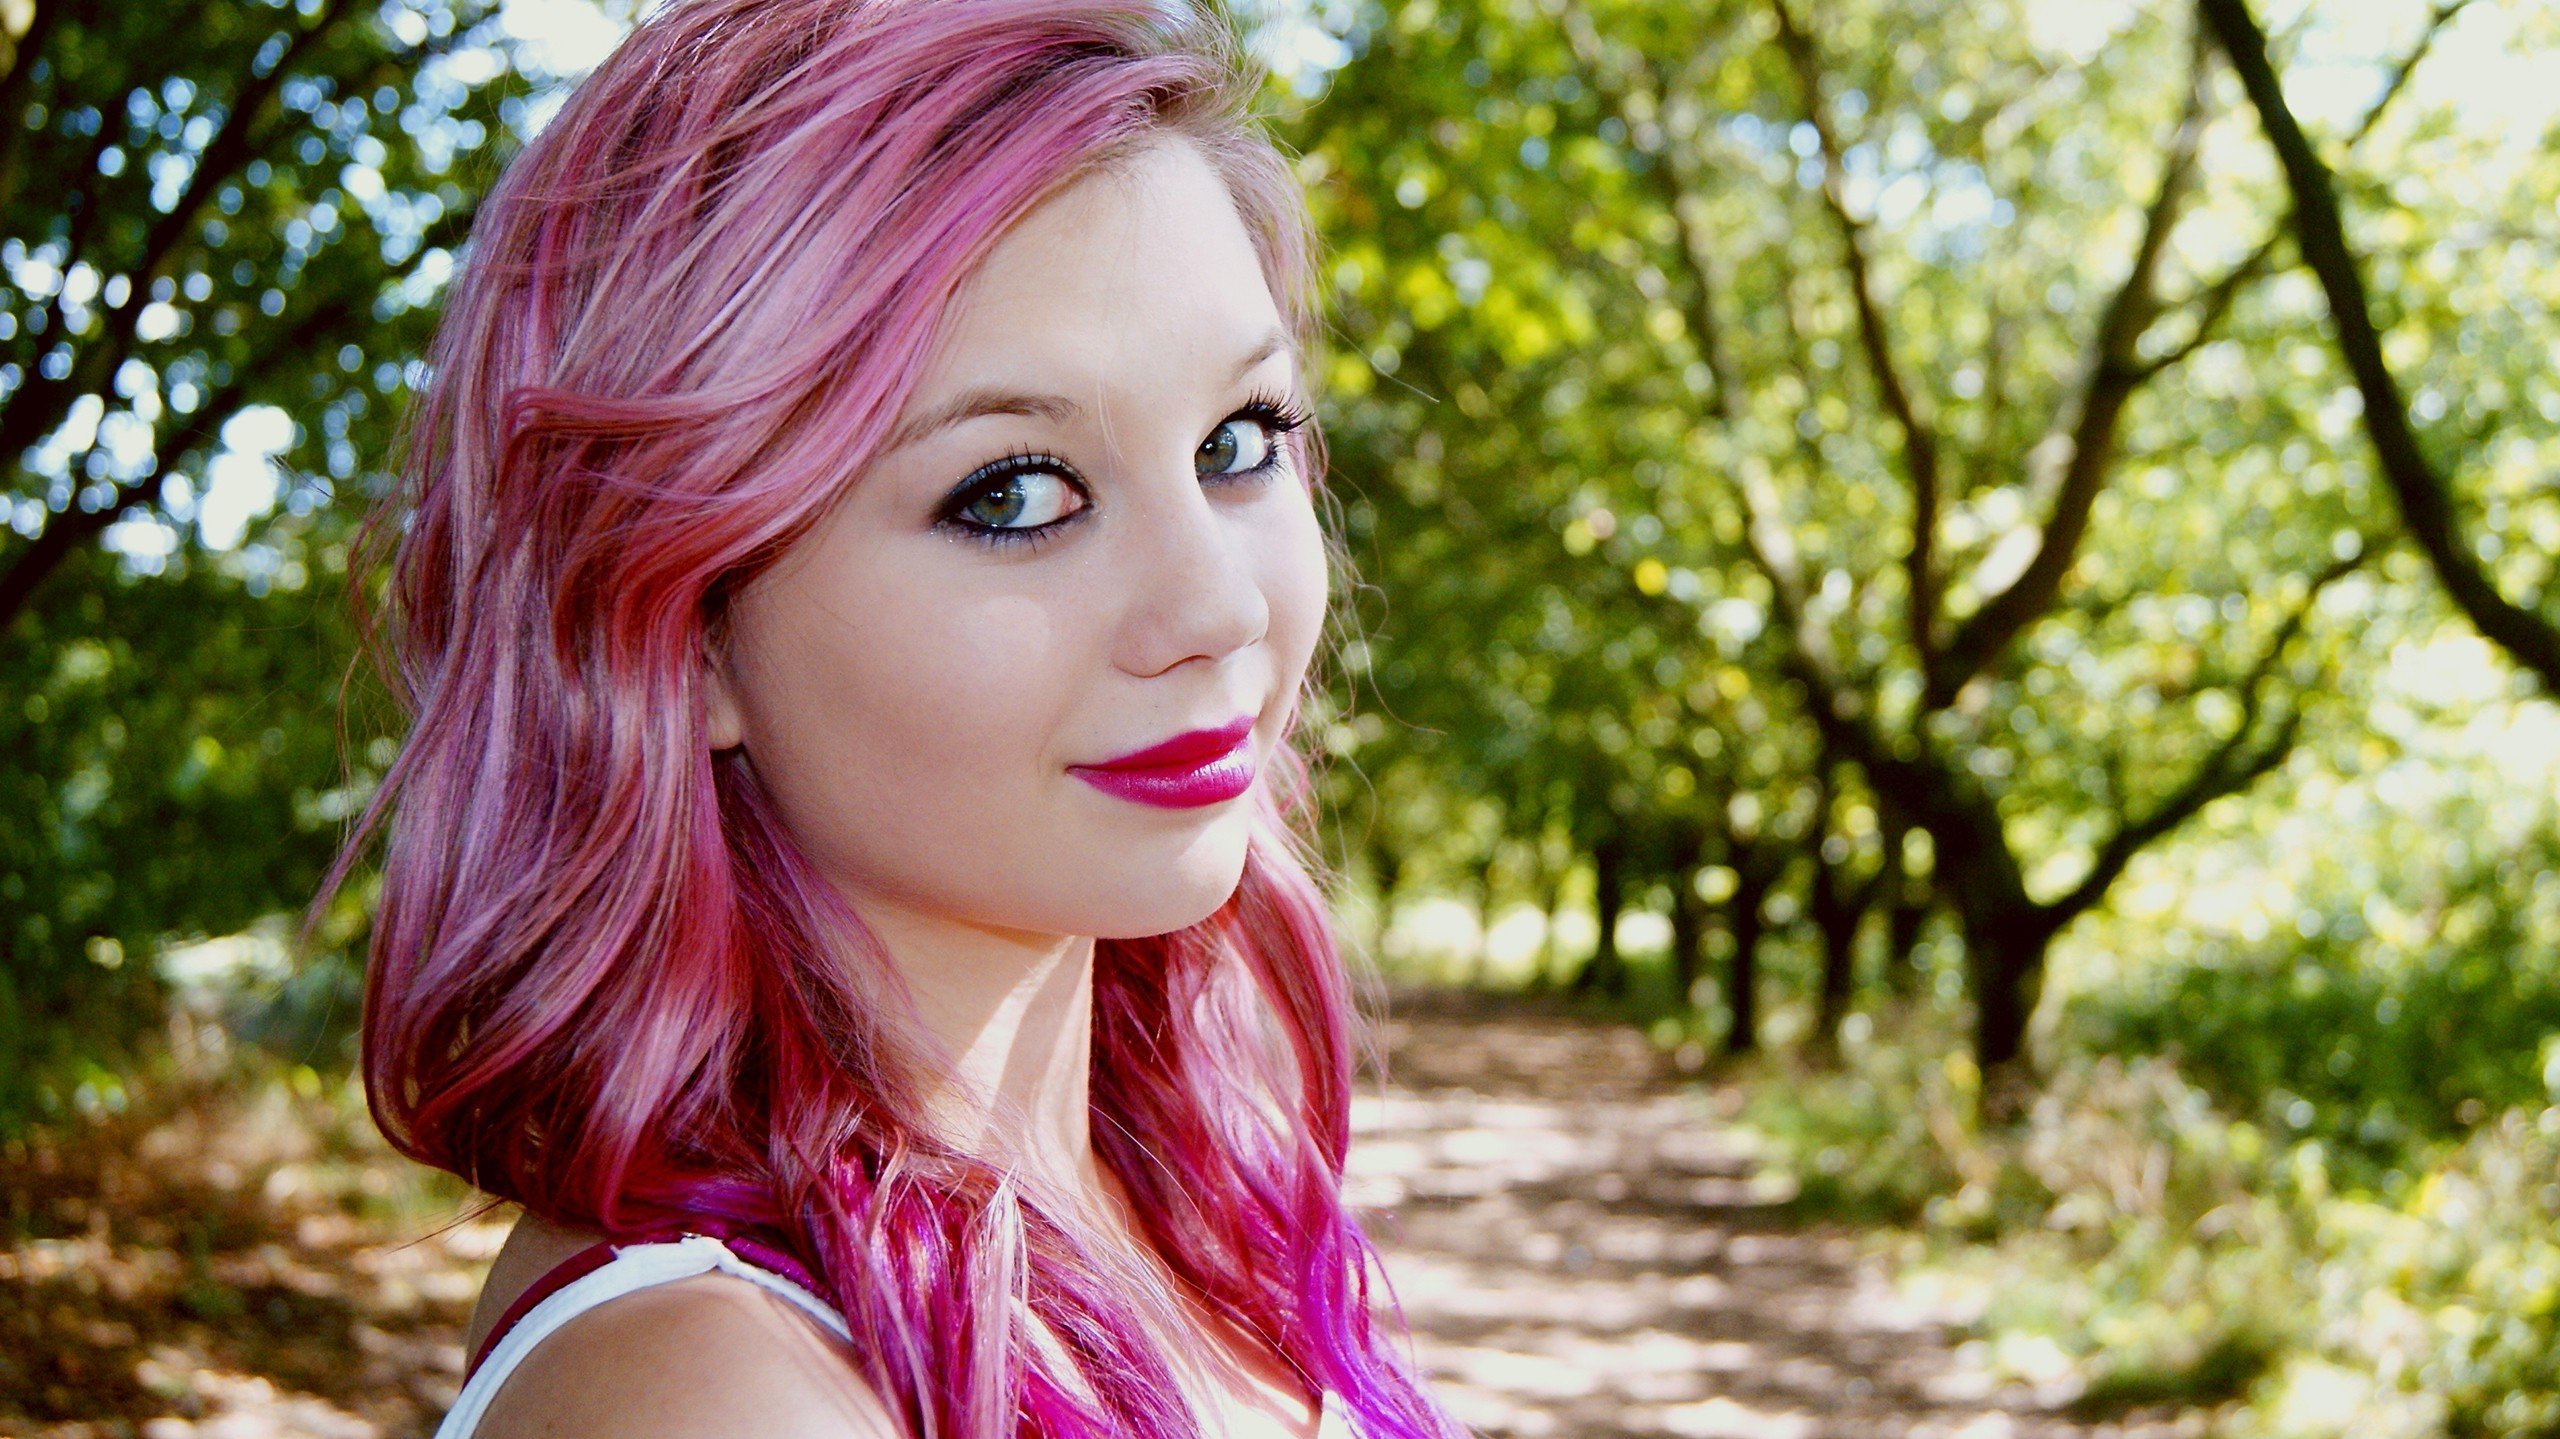 blu hair and pink beauty